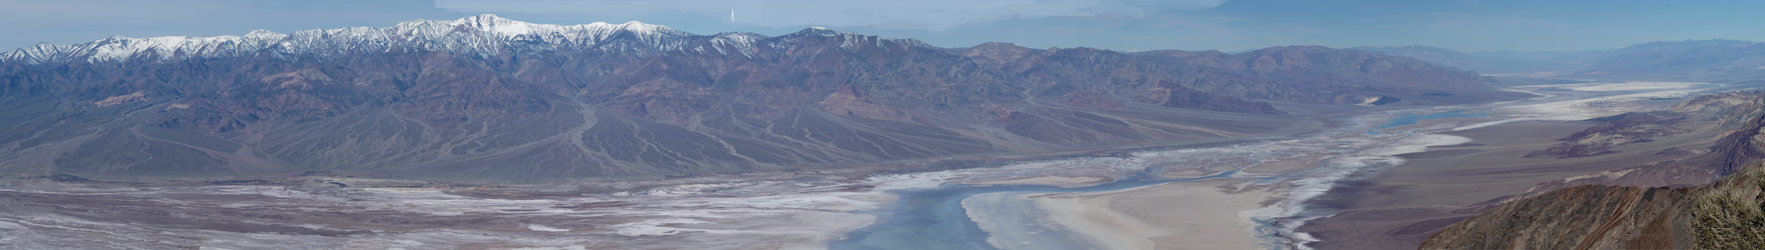 Dante's View Death Valley National Park CA